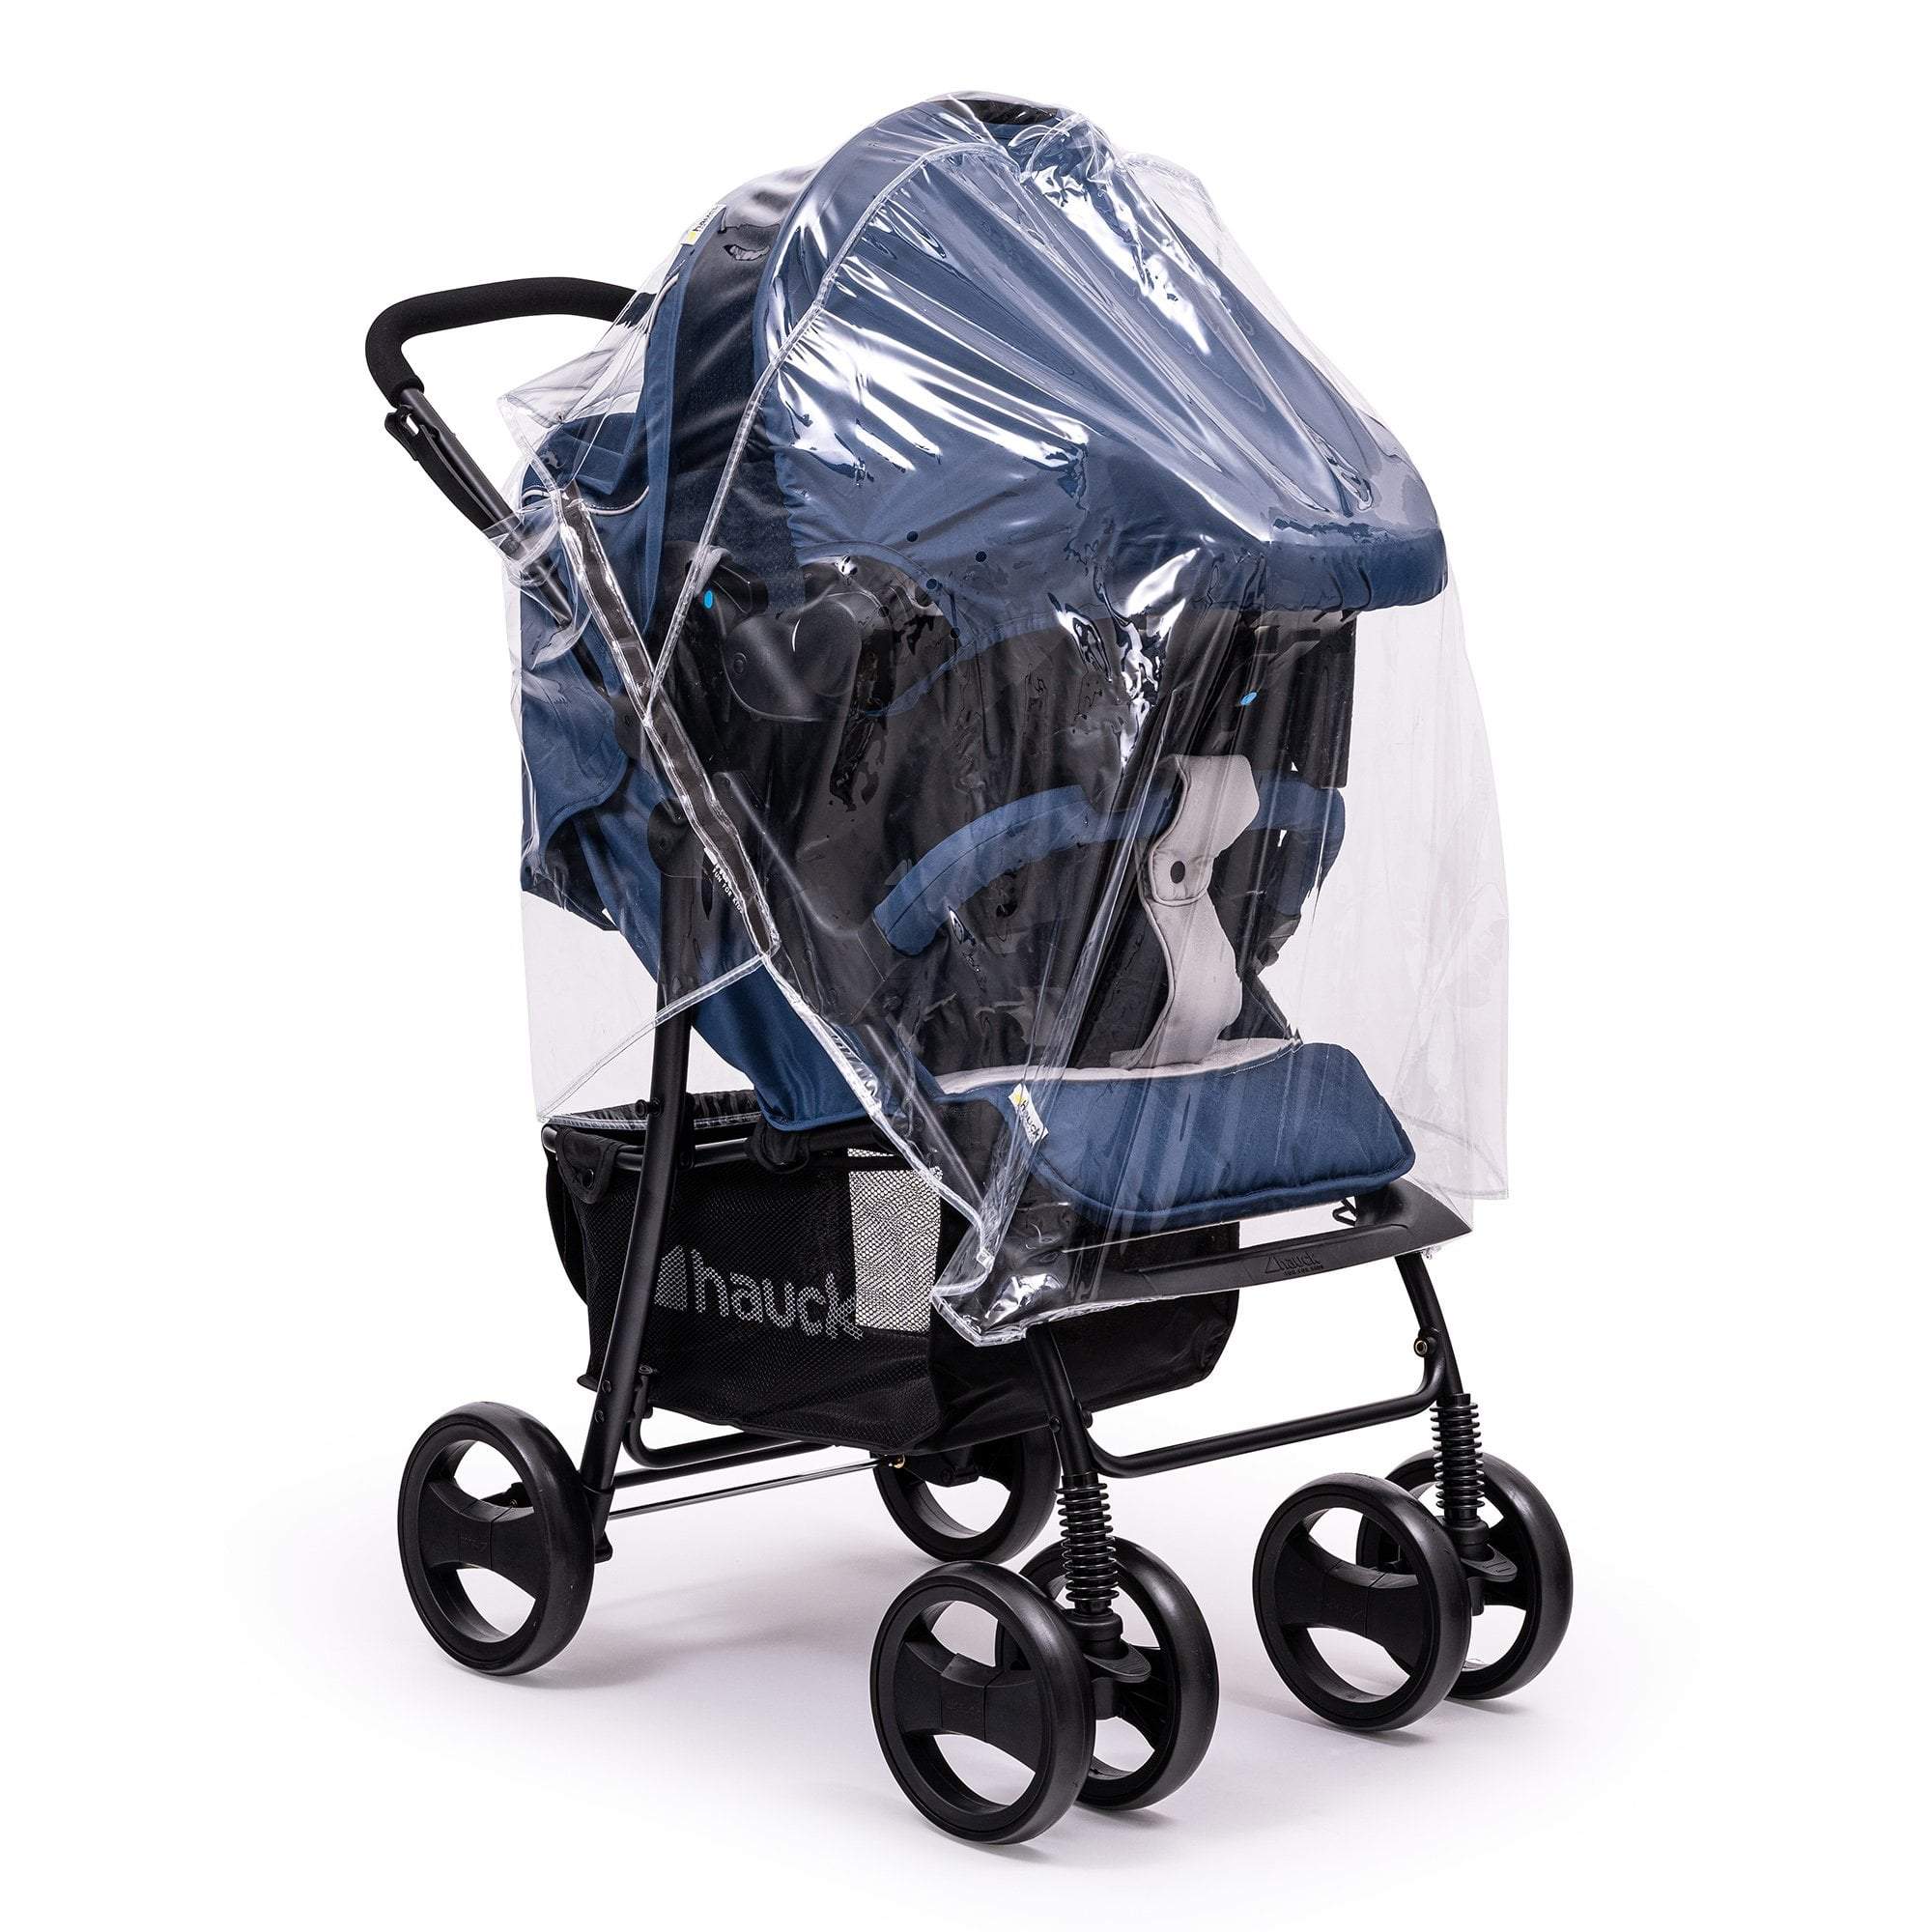 Travel System Raincover Compatible with Bloom - Fits All Models - For Your Little One